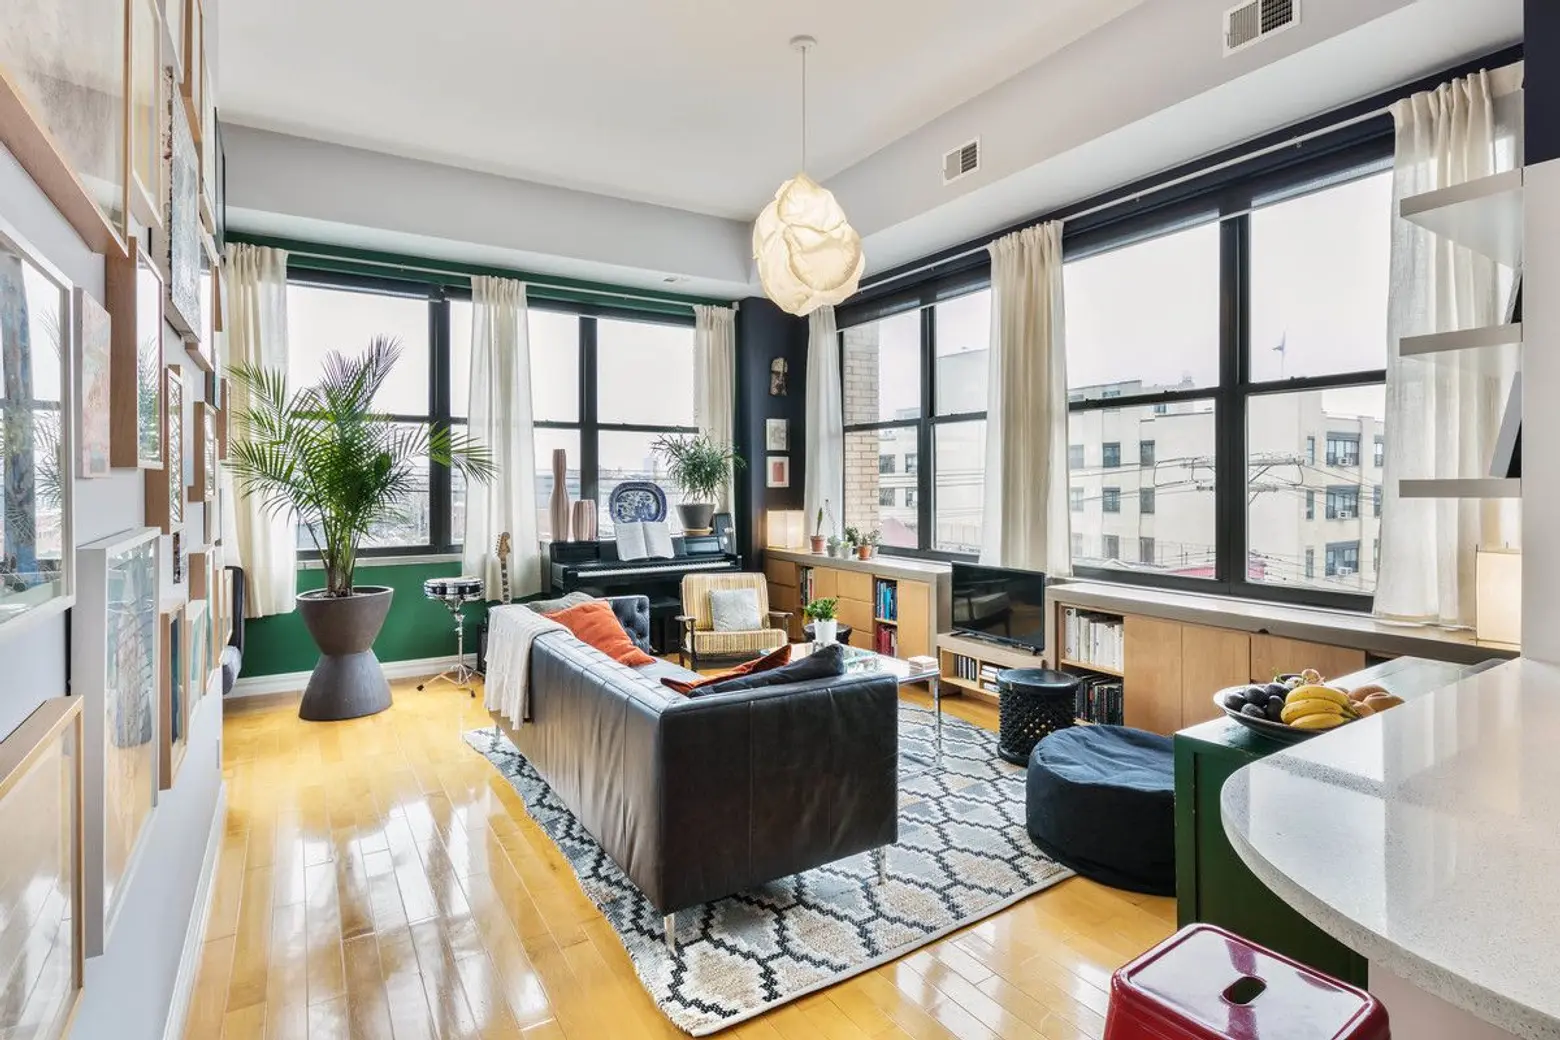 Configure your loft life any way you like in this $1M Bushwick condo